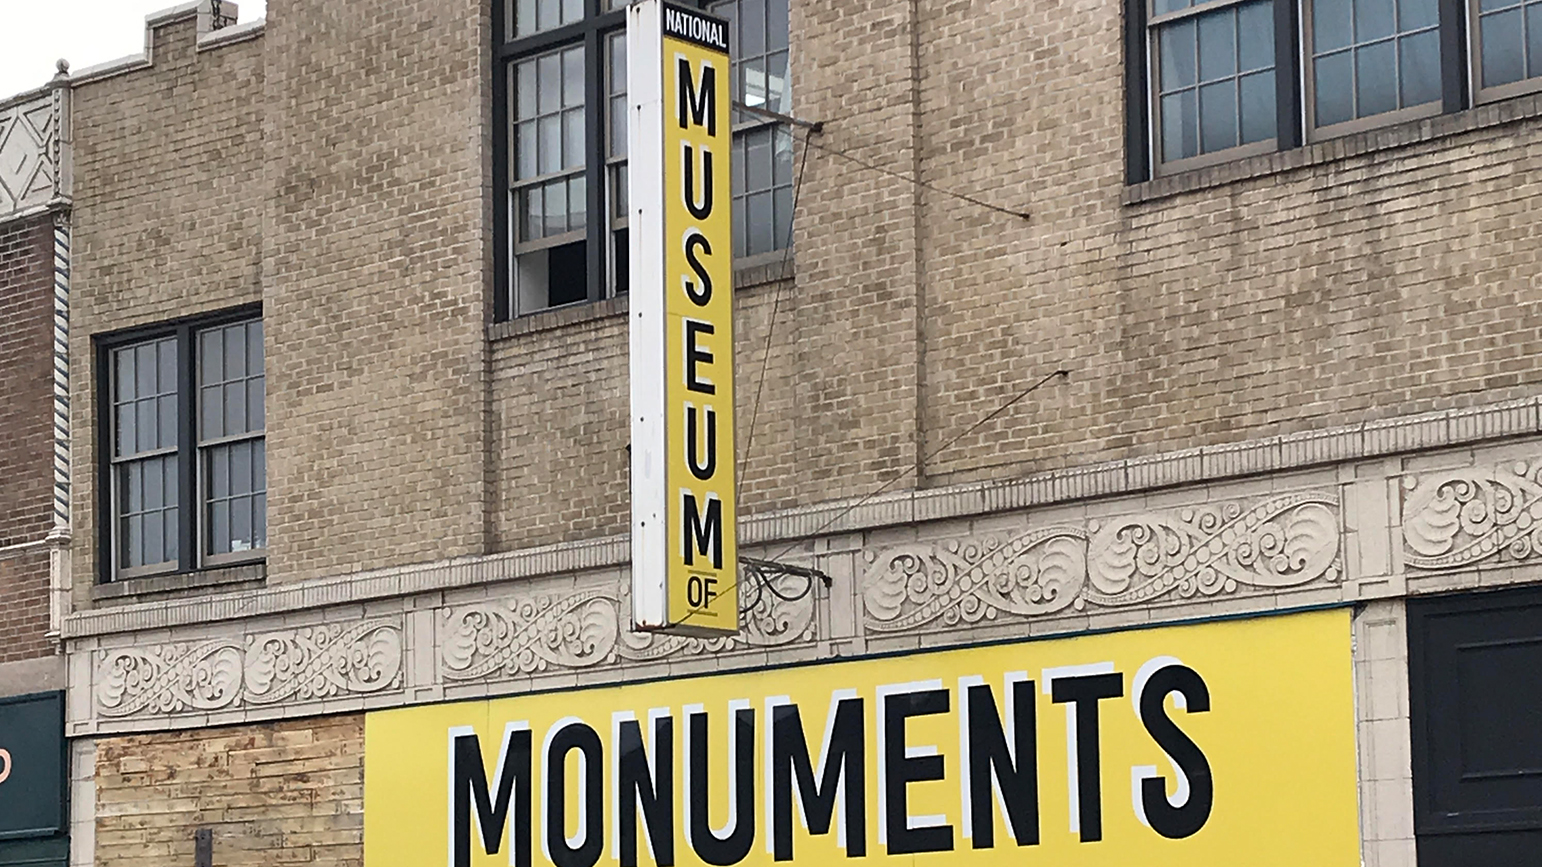 Photograph of a store front with signage reading "National Museum of" and "Monuments"